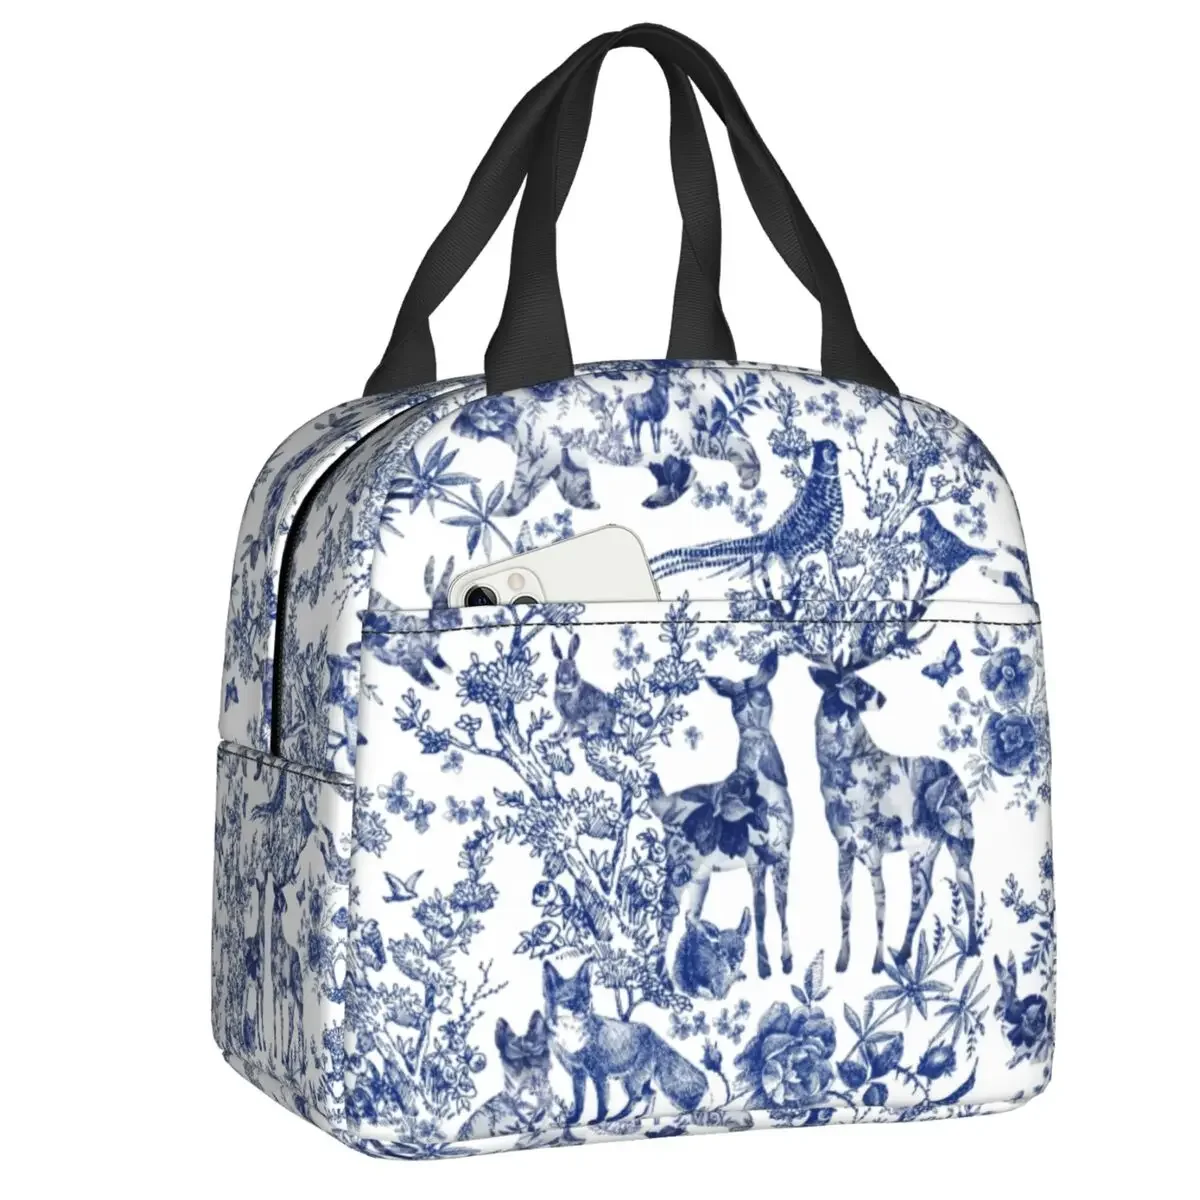 

French Toile De Jouy Lunch Box Multifunction Floral Animal Forest Indigo Pattern Thermal Cooler Food Insulated Lunch Bag Kids